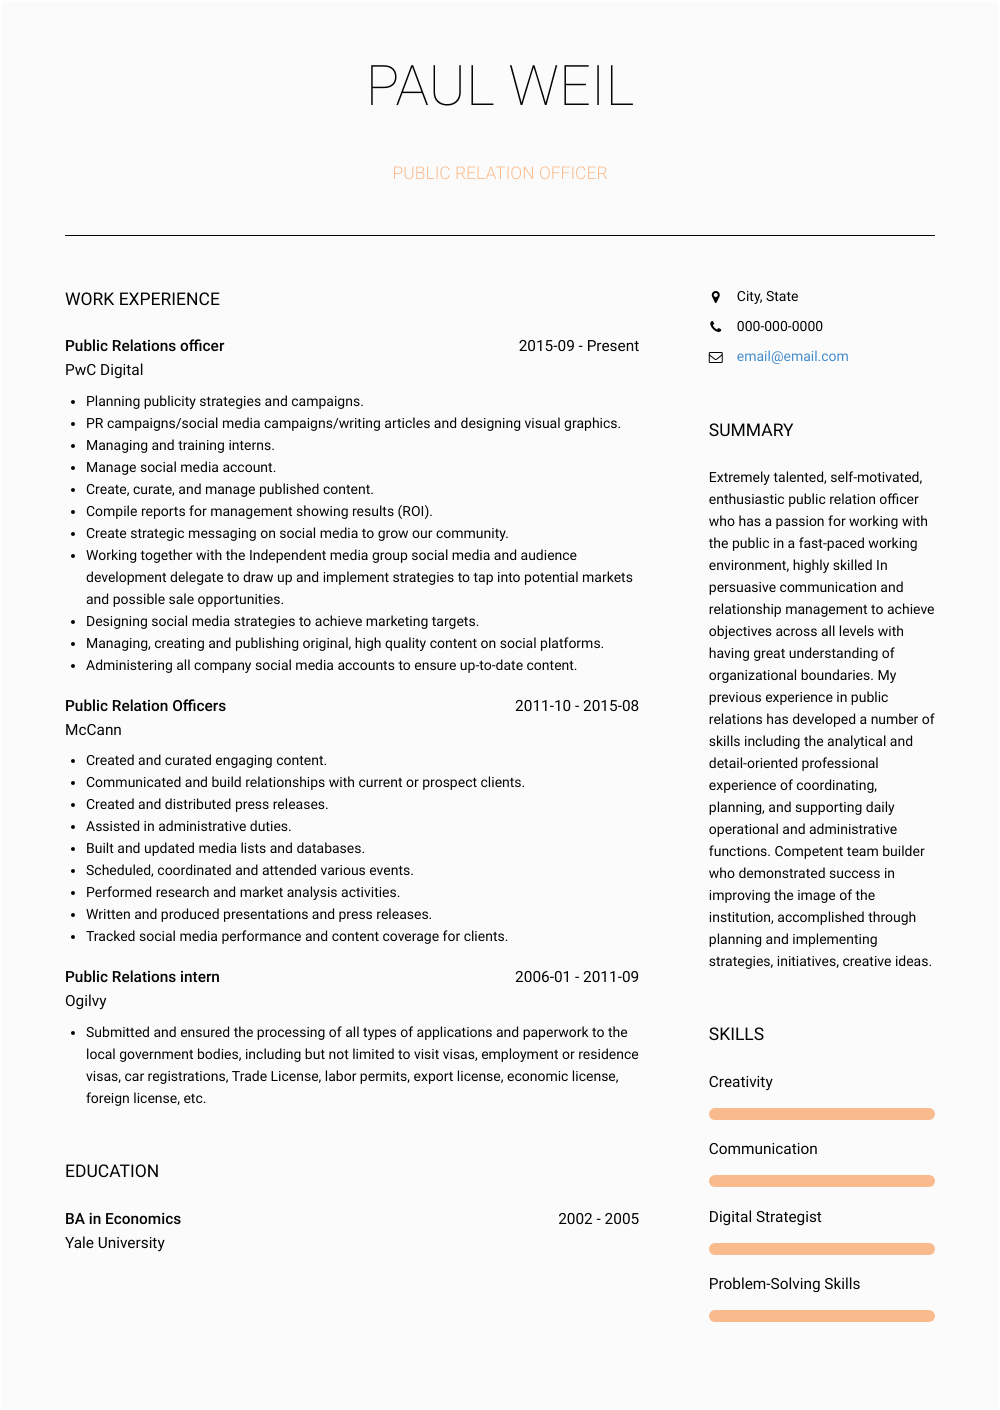 Marketing and Public Relations Resume Sample Public Relations Resume Samples and Templates